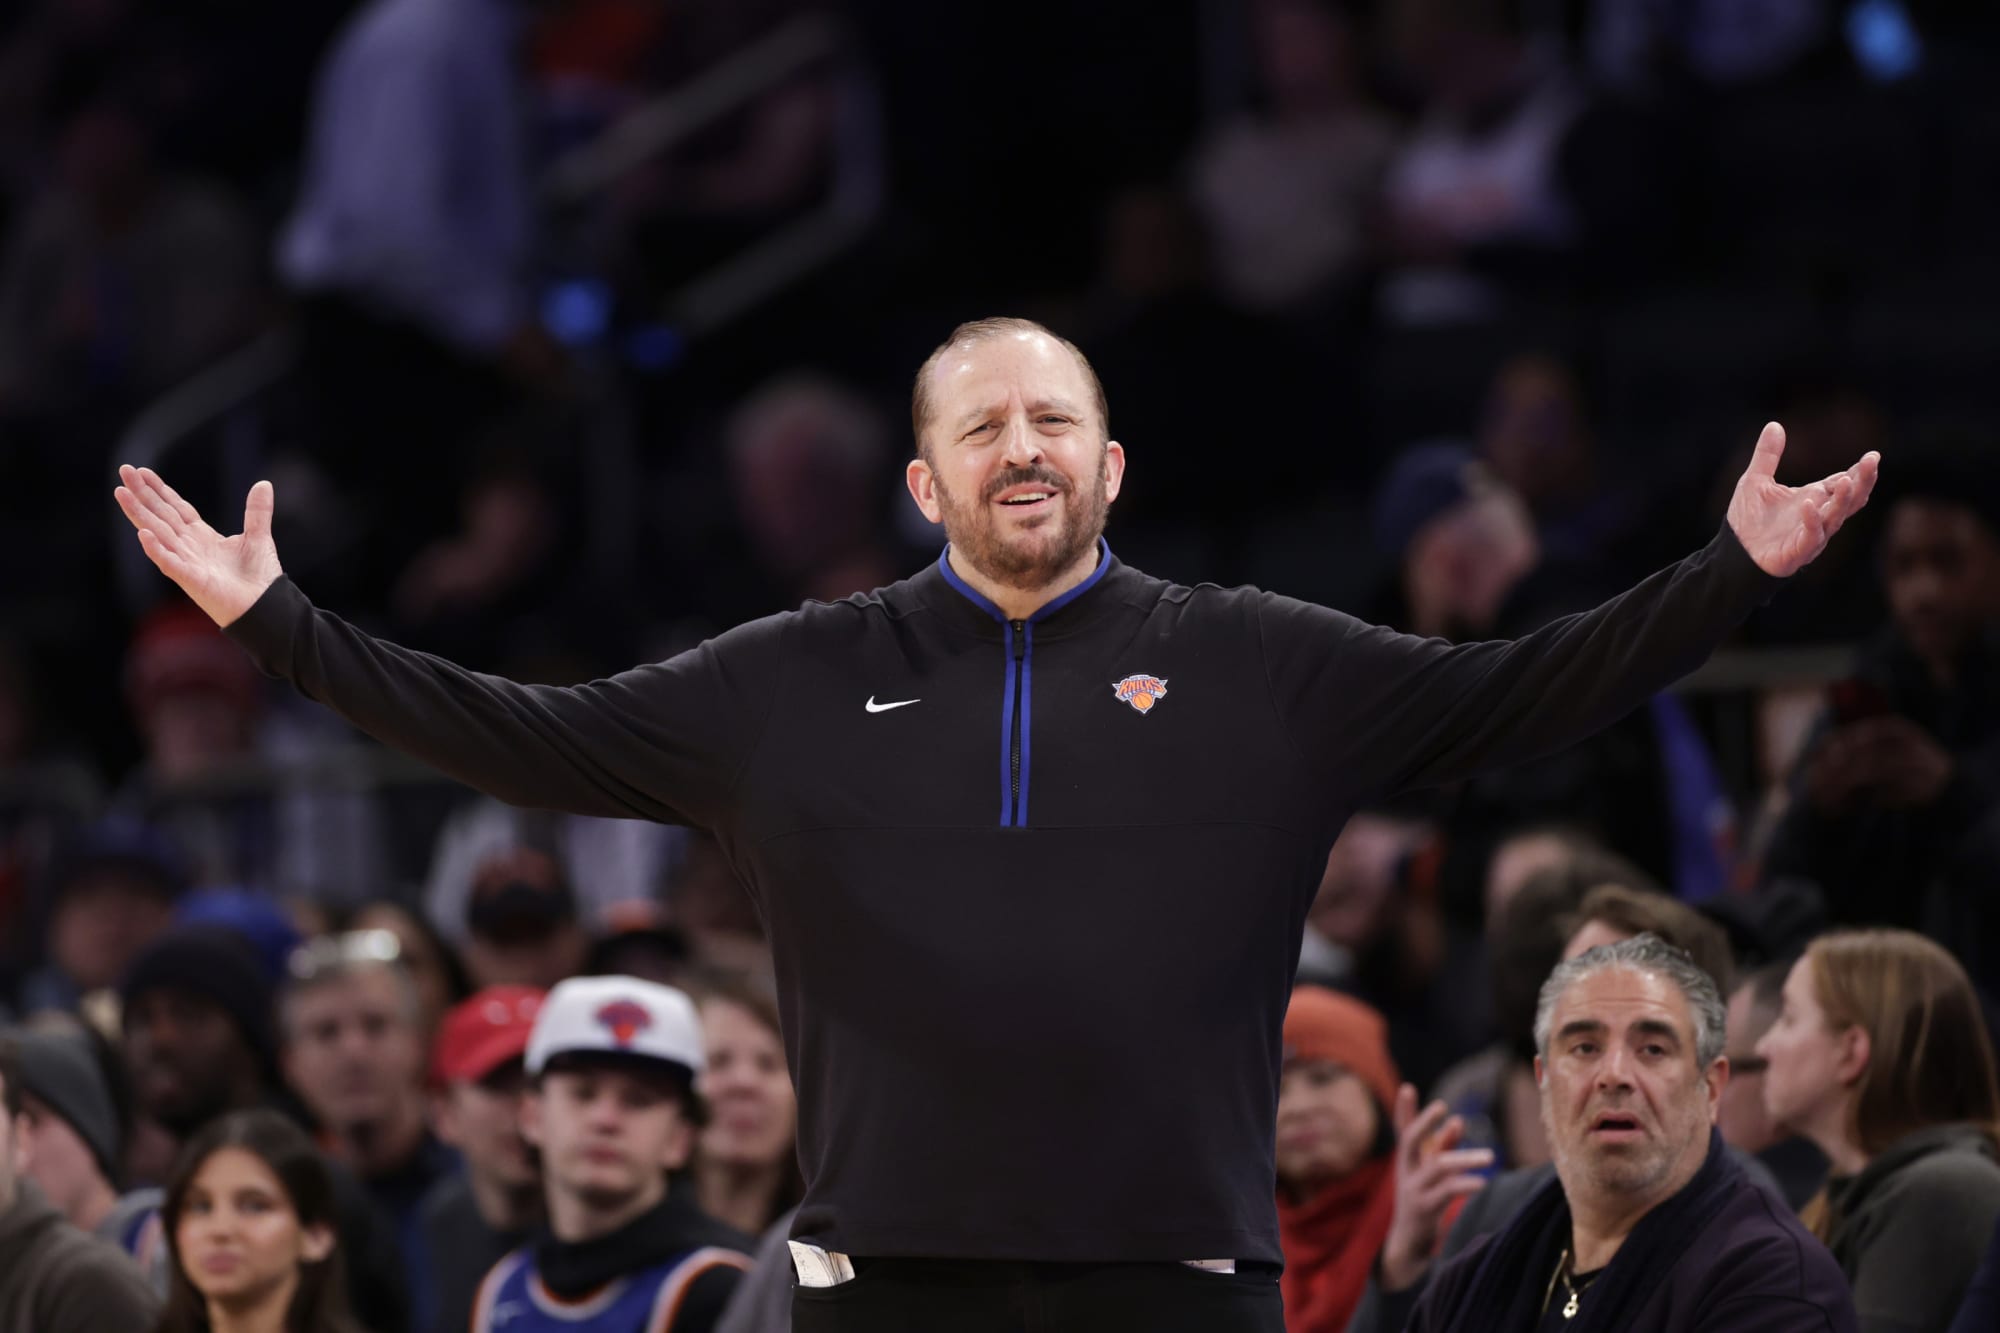 Has Tom Thibodeau proven he’s the right coach for the Knicks?